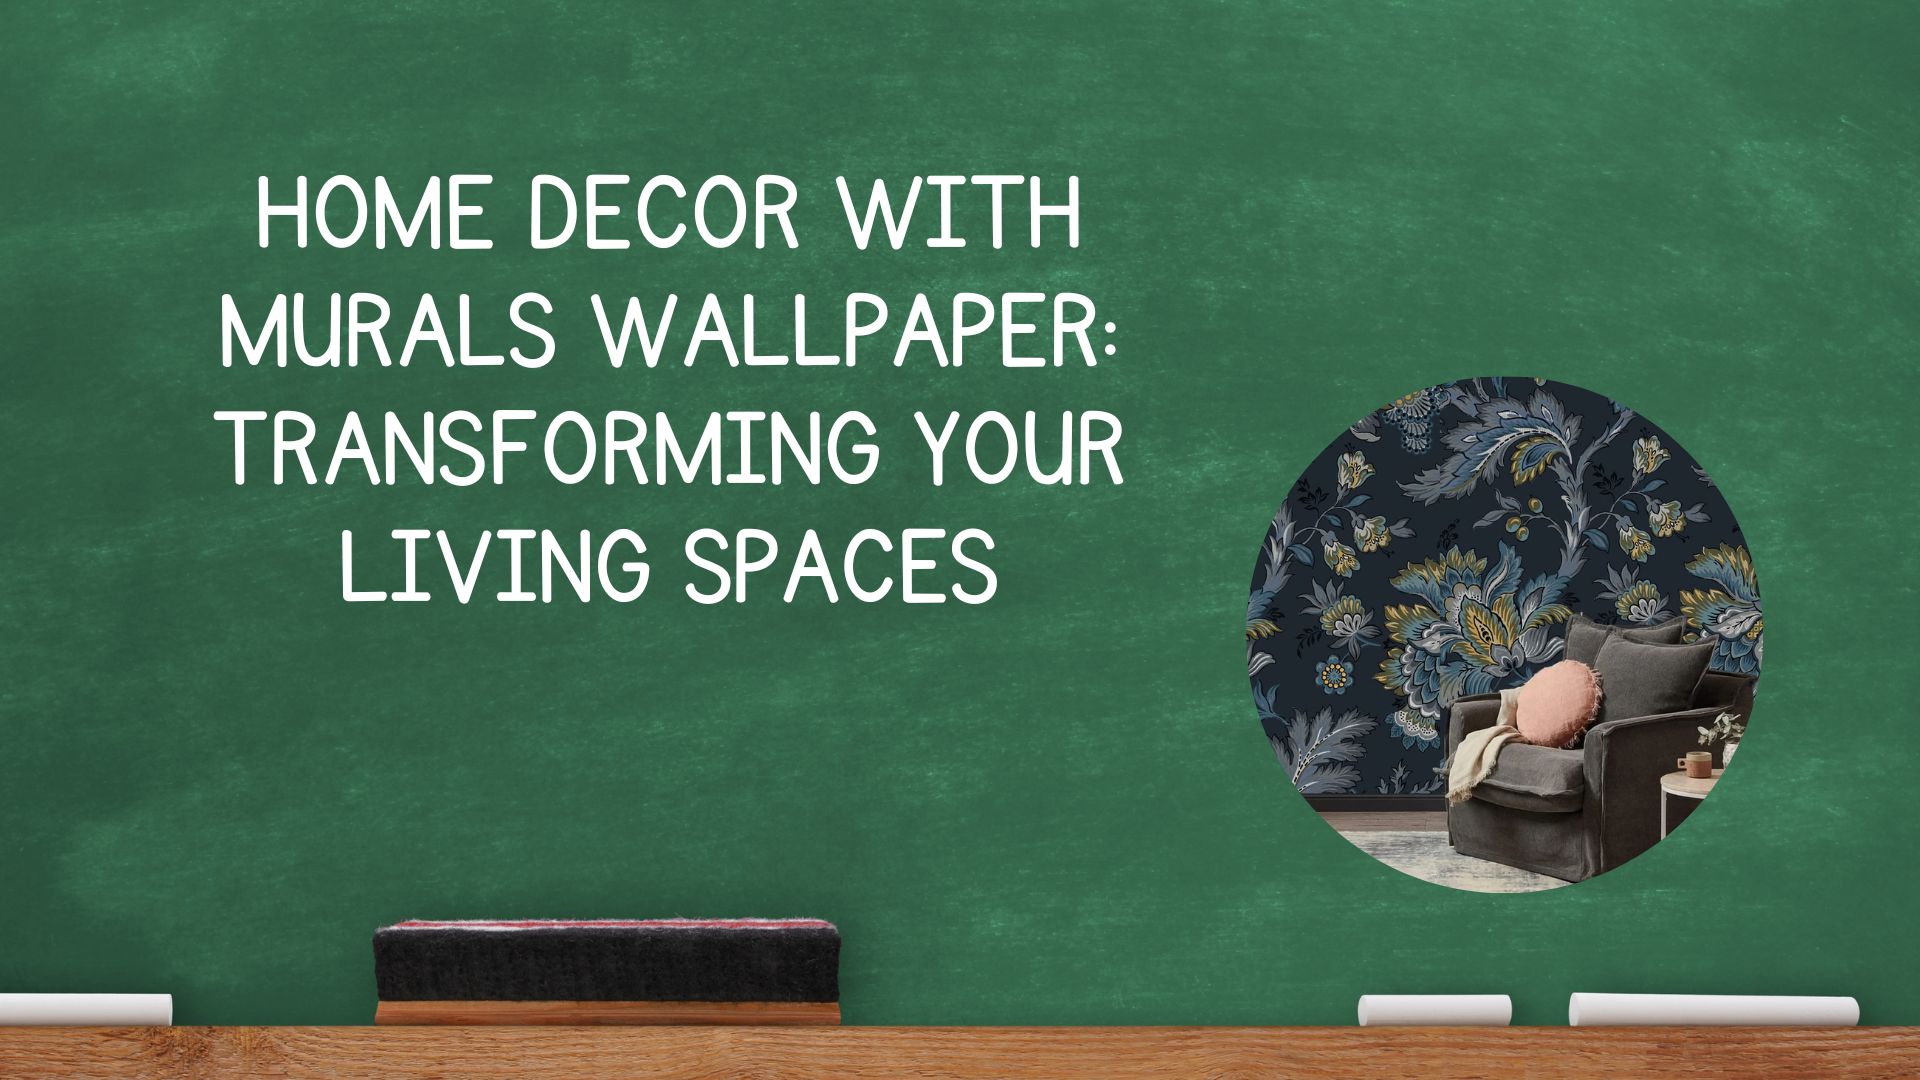 Floral Wallpapers: Bringing Nature's Beauty to Your Space - Databusinessonline.com